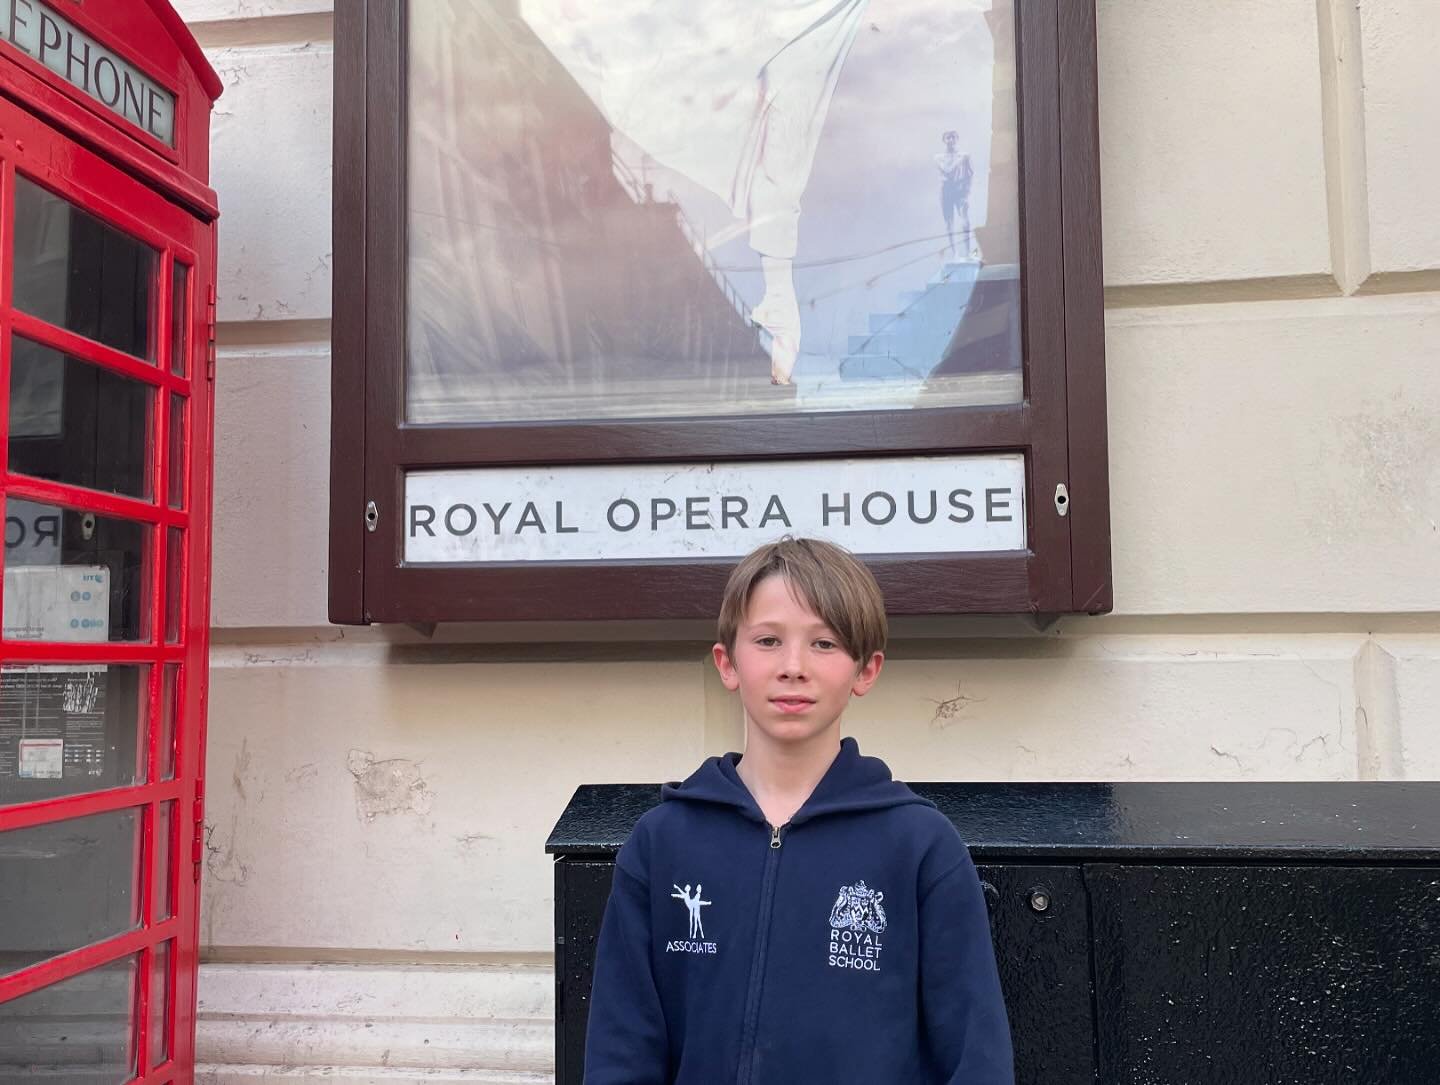 Rush rush up to Covent Garden as Sebastian is needed on the stage in a few hours this evening in the Royal Ballets production of A Winters Tale. He is replacing a dancer who broke his foot.  Quick pizza then off to take my seat.